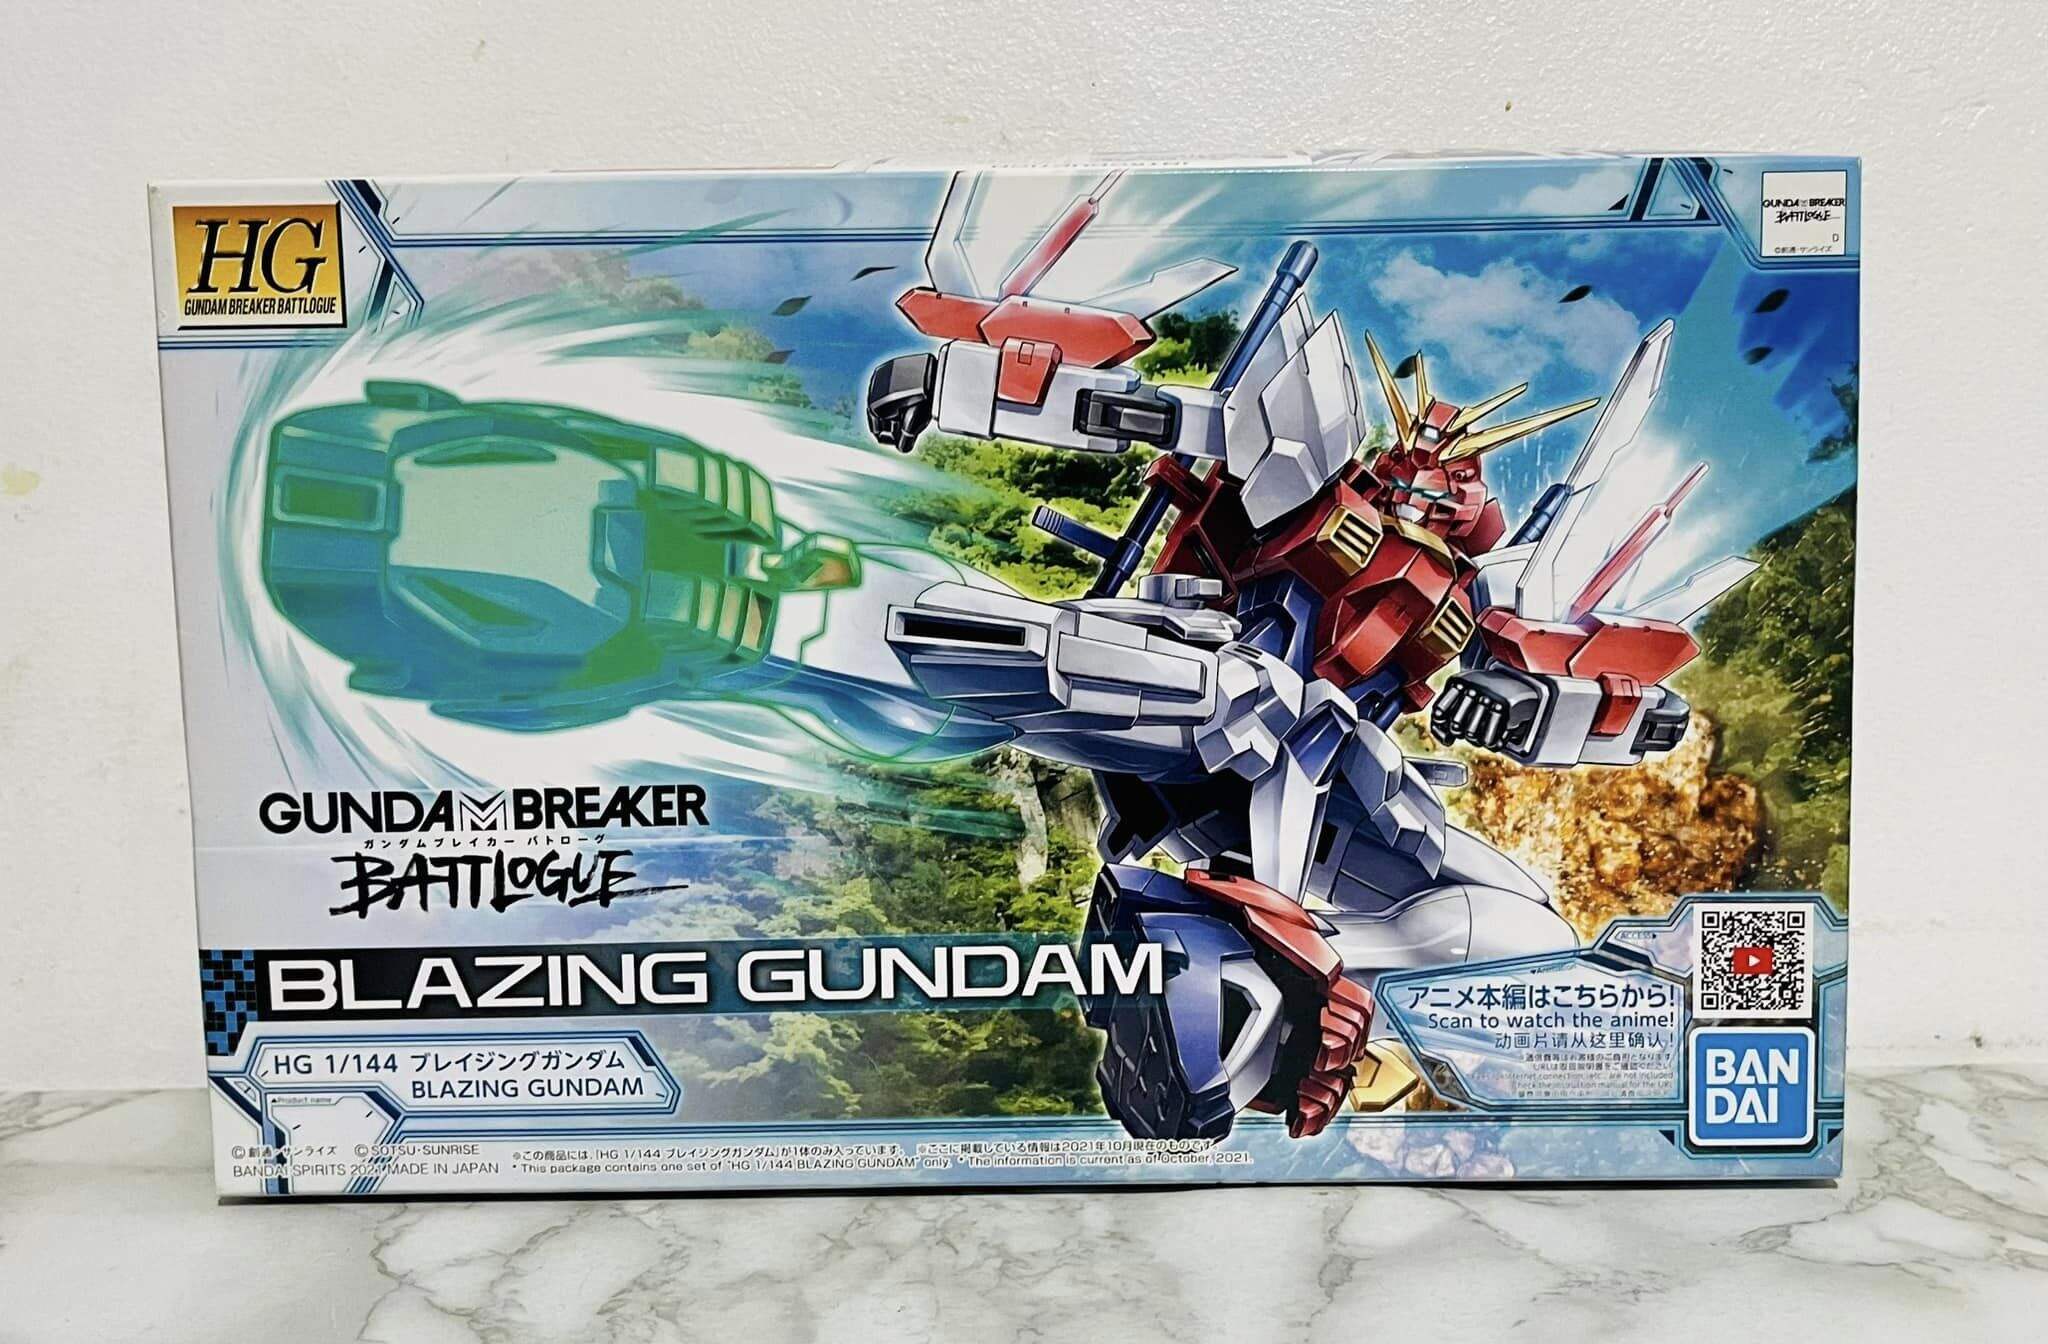 Ultimate Model Kit Review: The Perfect Gift for Him